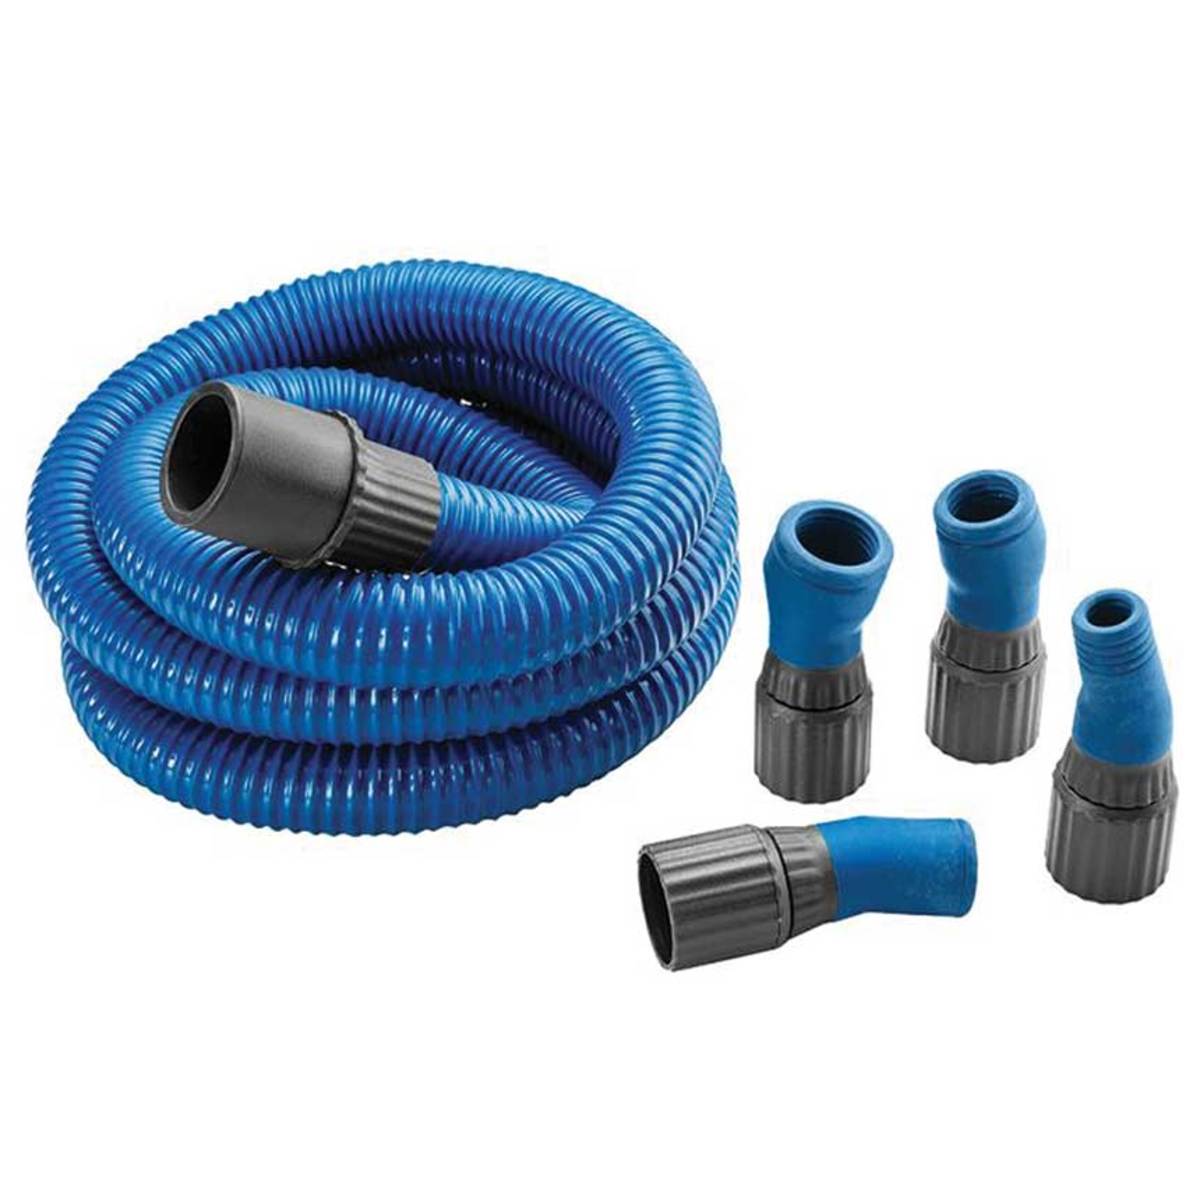 Rockler’s Dust Right small port kit